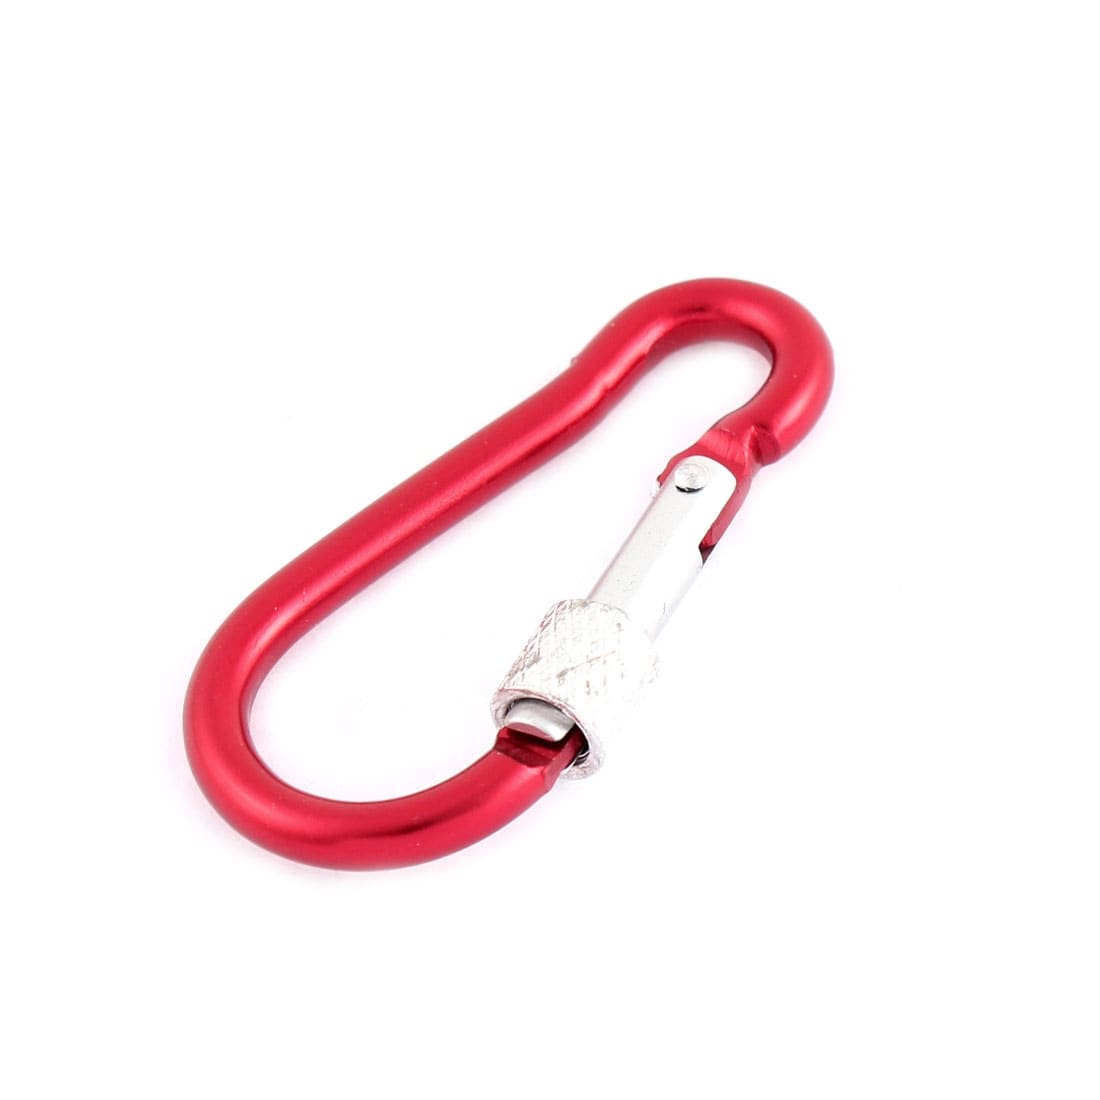 Unique Bargains Traveling Fishing Spring Loaded Screw Lock Keychain  Carabiner Hook Red - Bed Bath & Beyond - 18382198